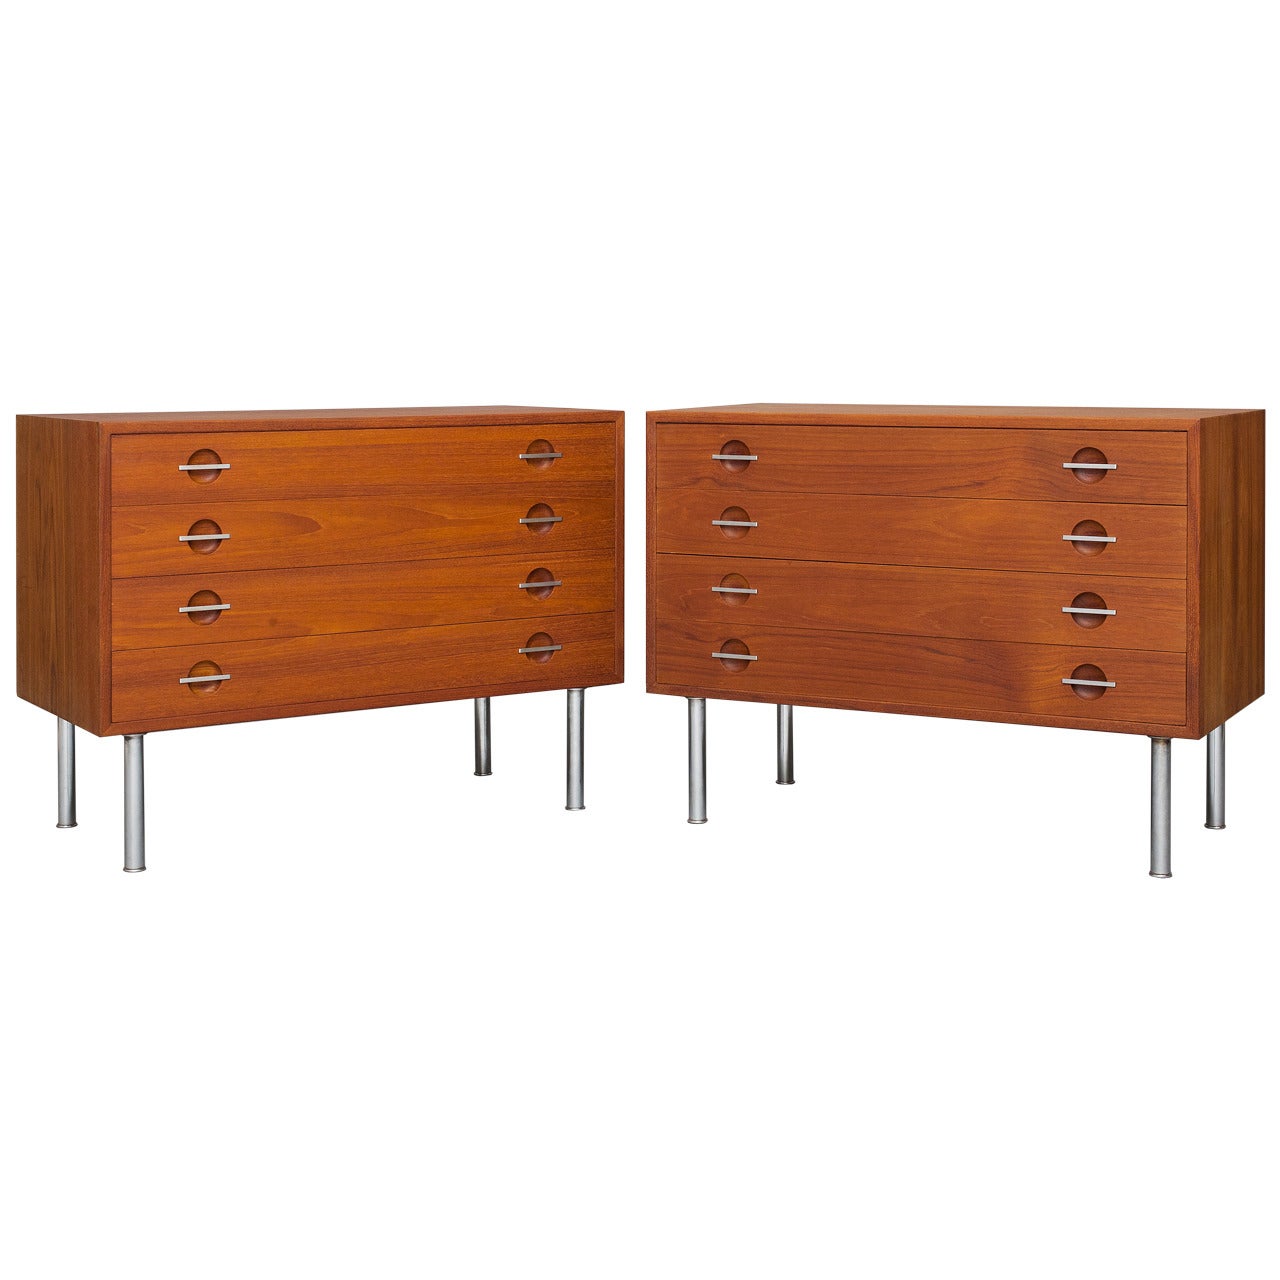 Pair of Chests by Hans J. Wegner for Ry Furniture